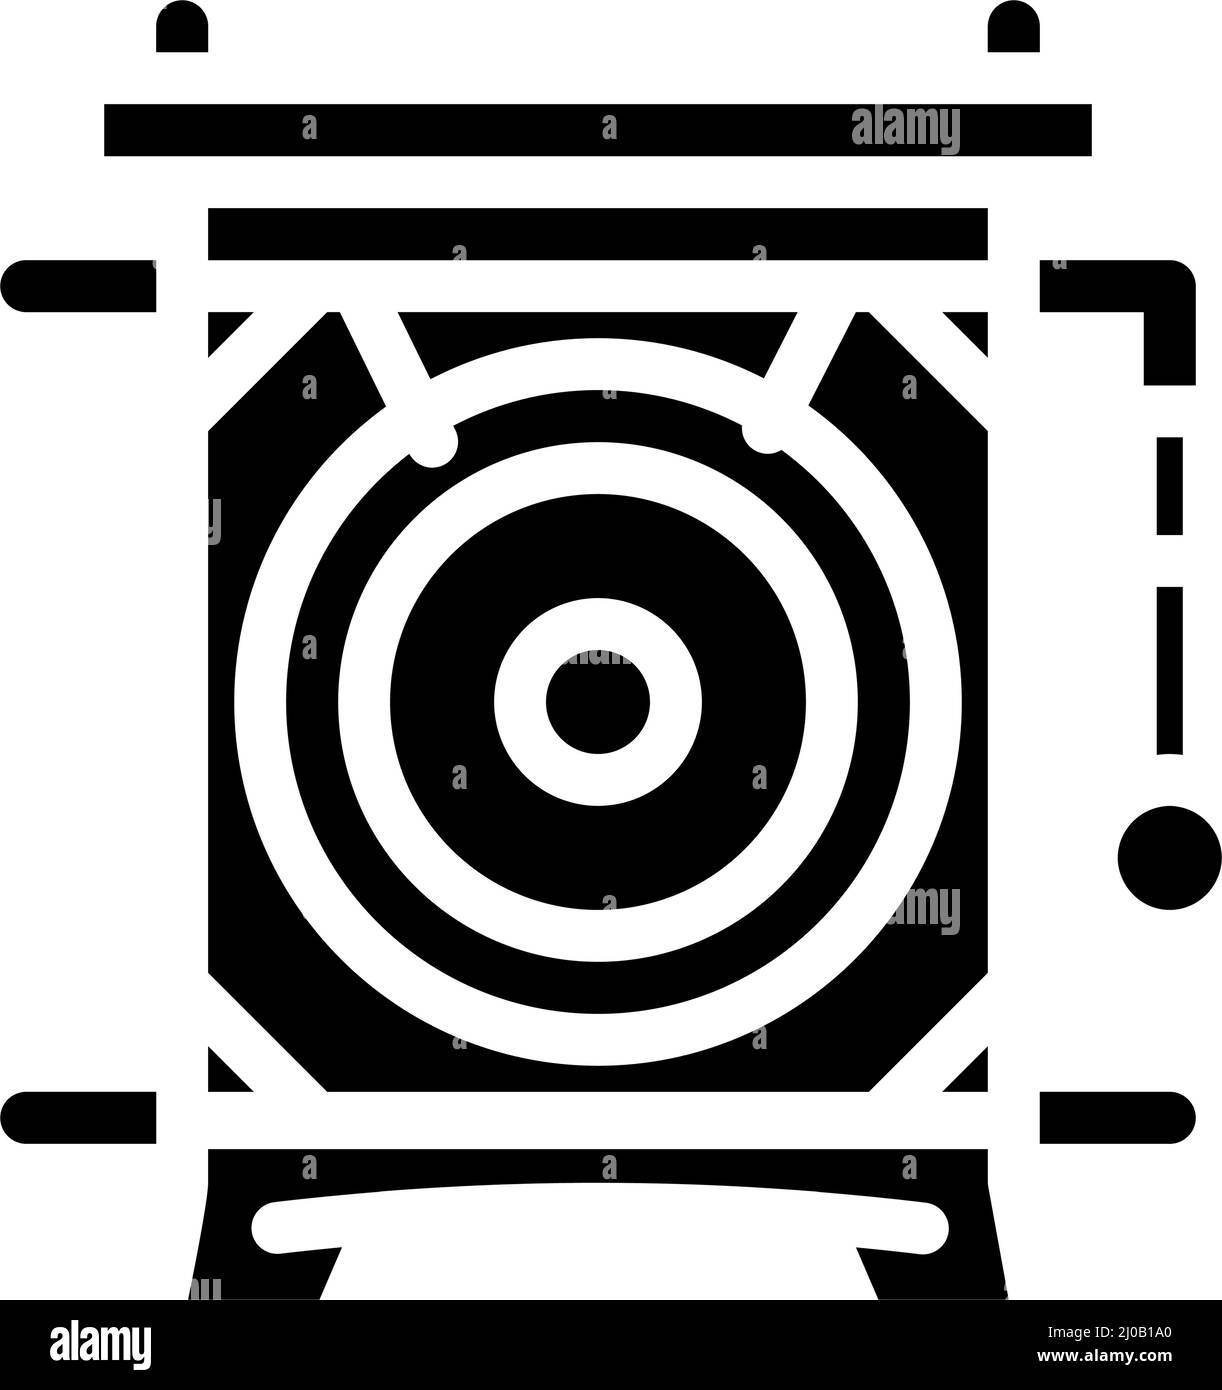 chinese gong glyph icon vector illustration Stock Vector